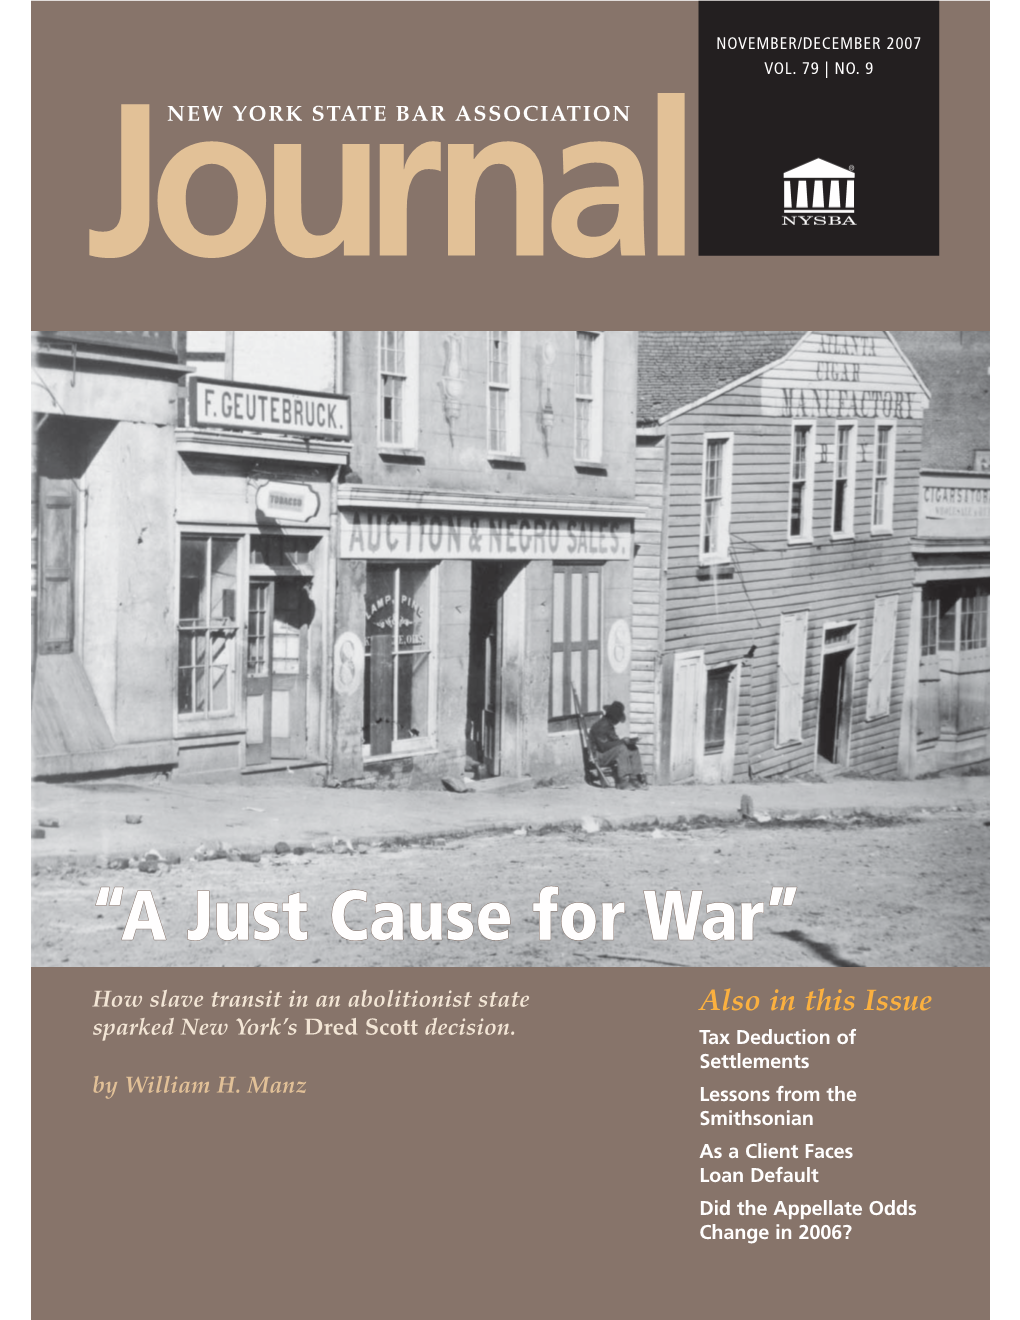 “A Just Cause for War”: New York’S Dred Scott Decision by William H